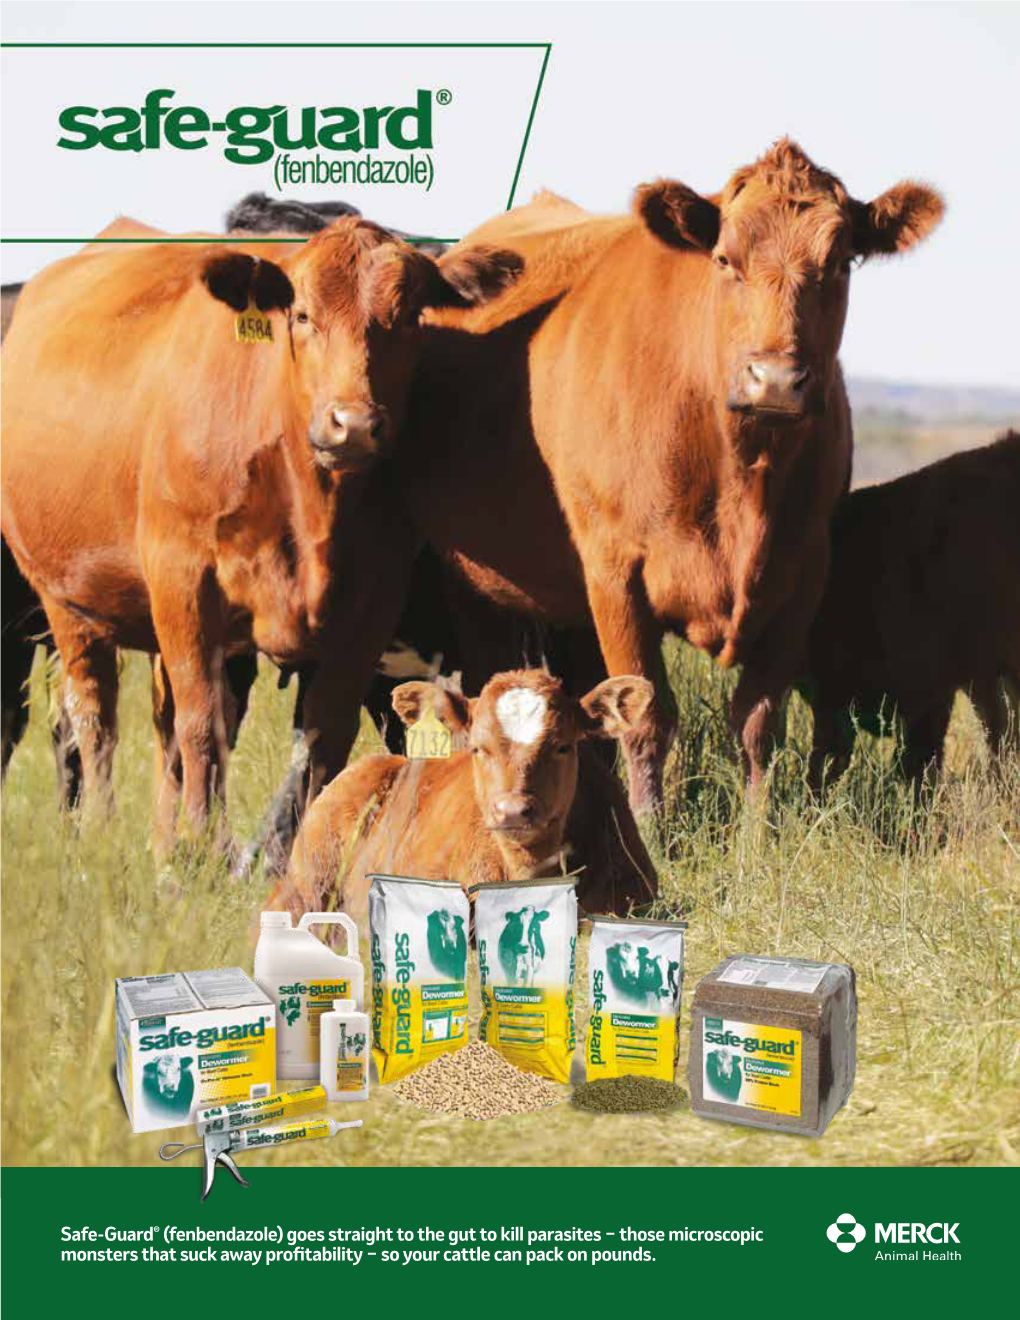 Safe-Guard® (Fenbendazole) Goes Straight to the Gut to Kill Parasites − Those Microscopic Monsters That Suck Away Profitability − So Your Cattle Can Pack on Pounds